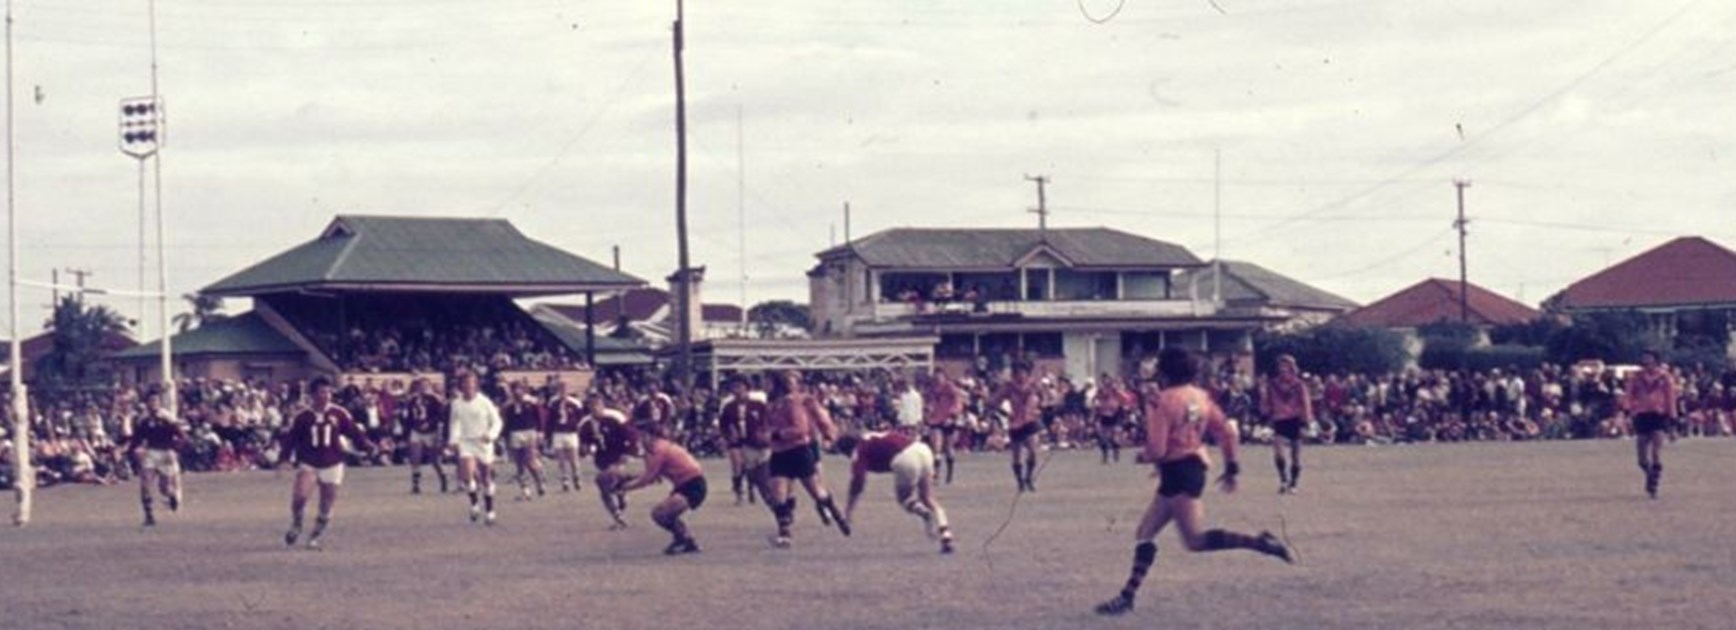 History of rugby league fields